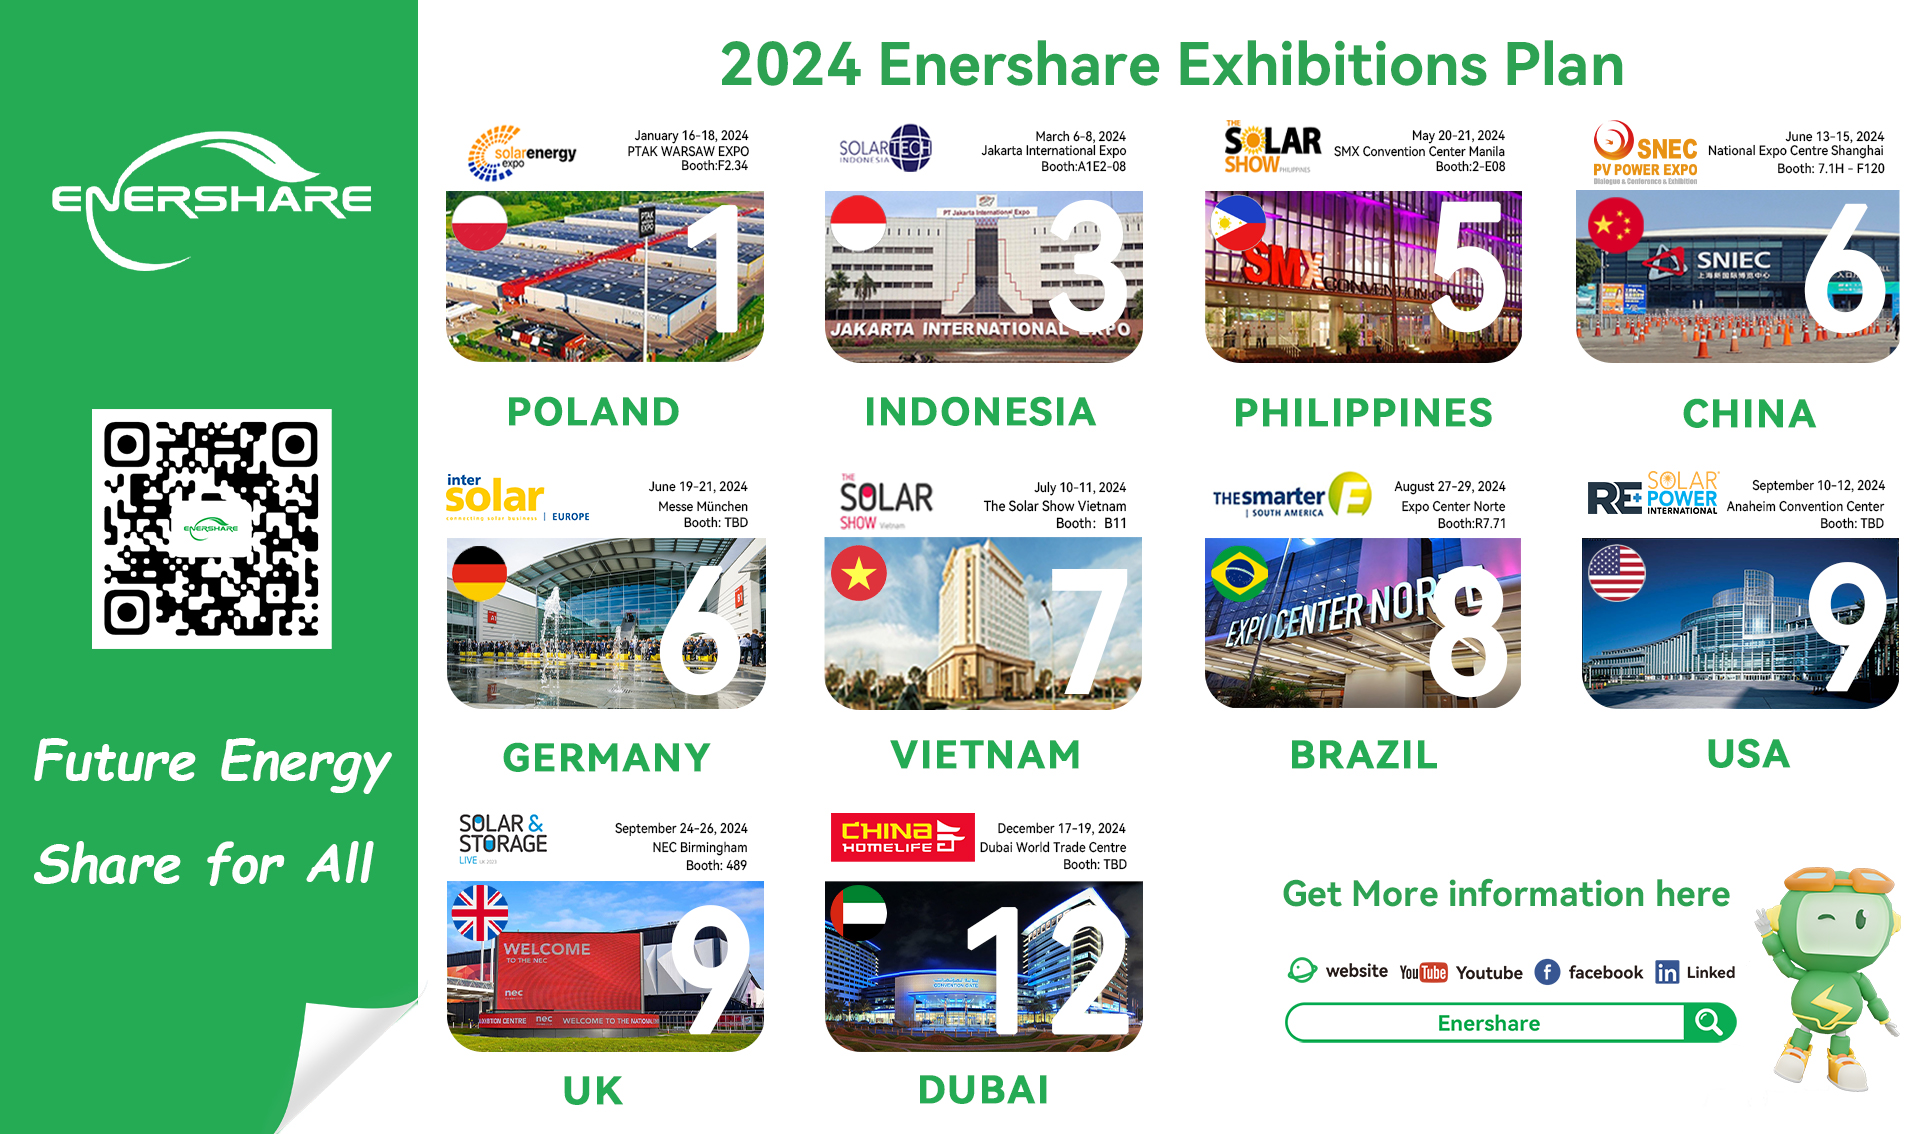 Enershare 2024 leads energy storage technology innovation and innovates into the future!